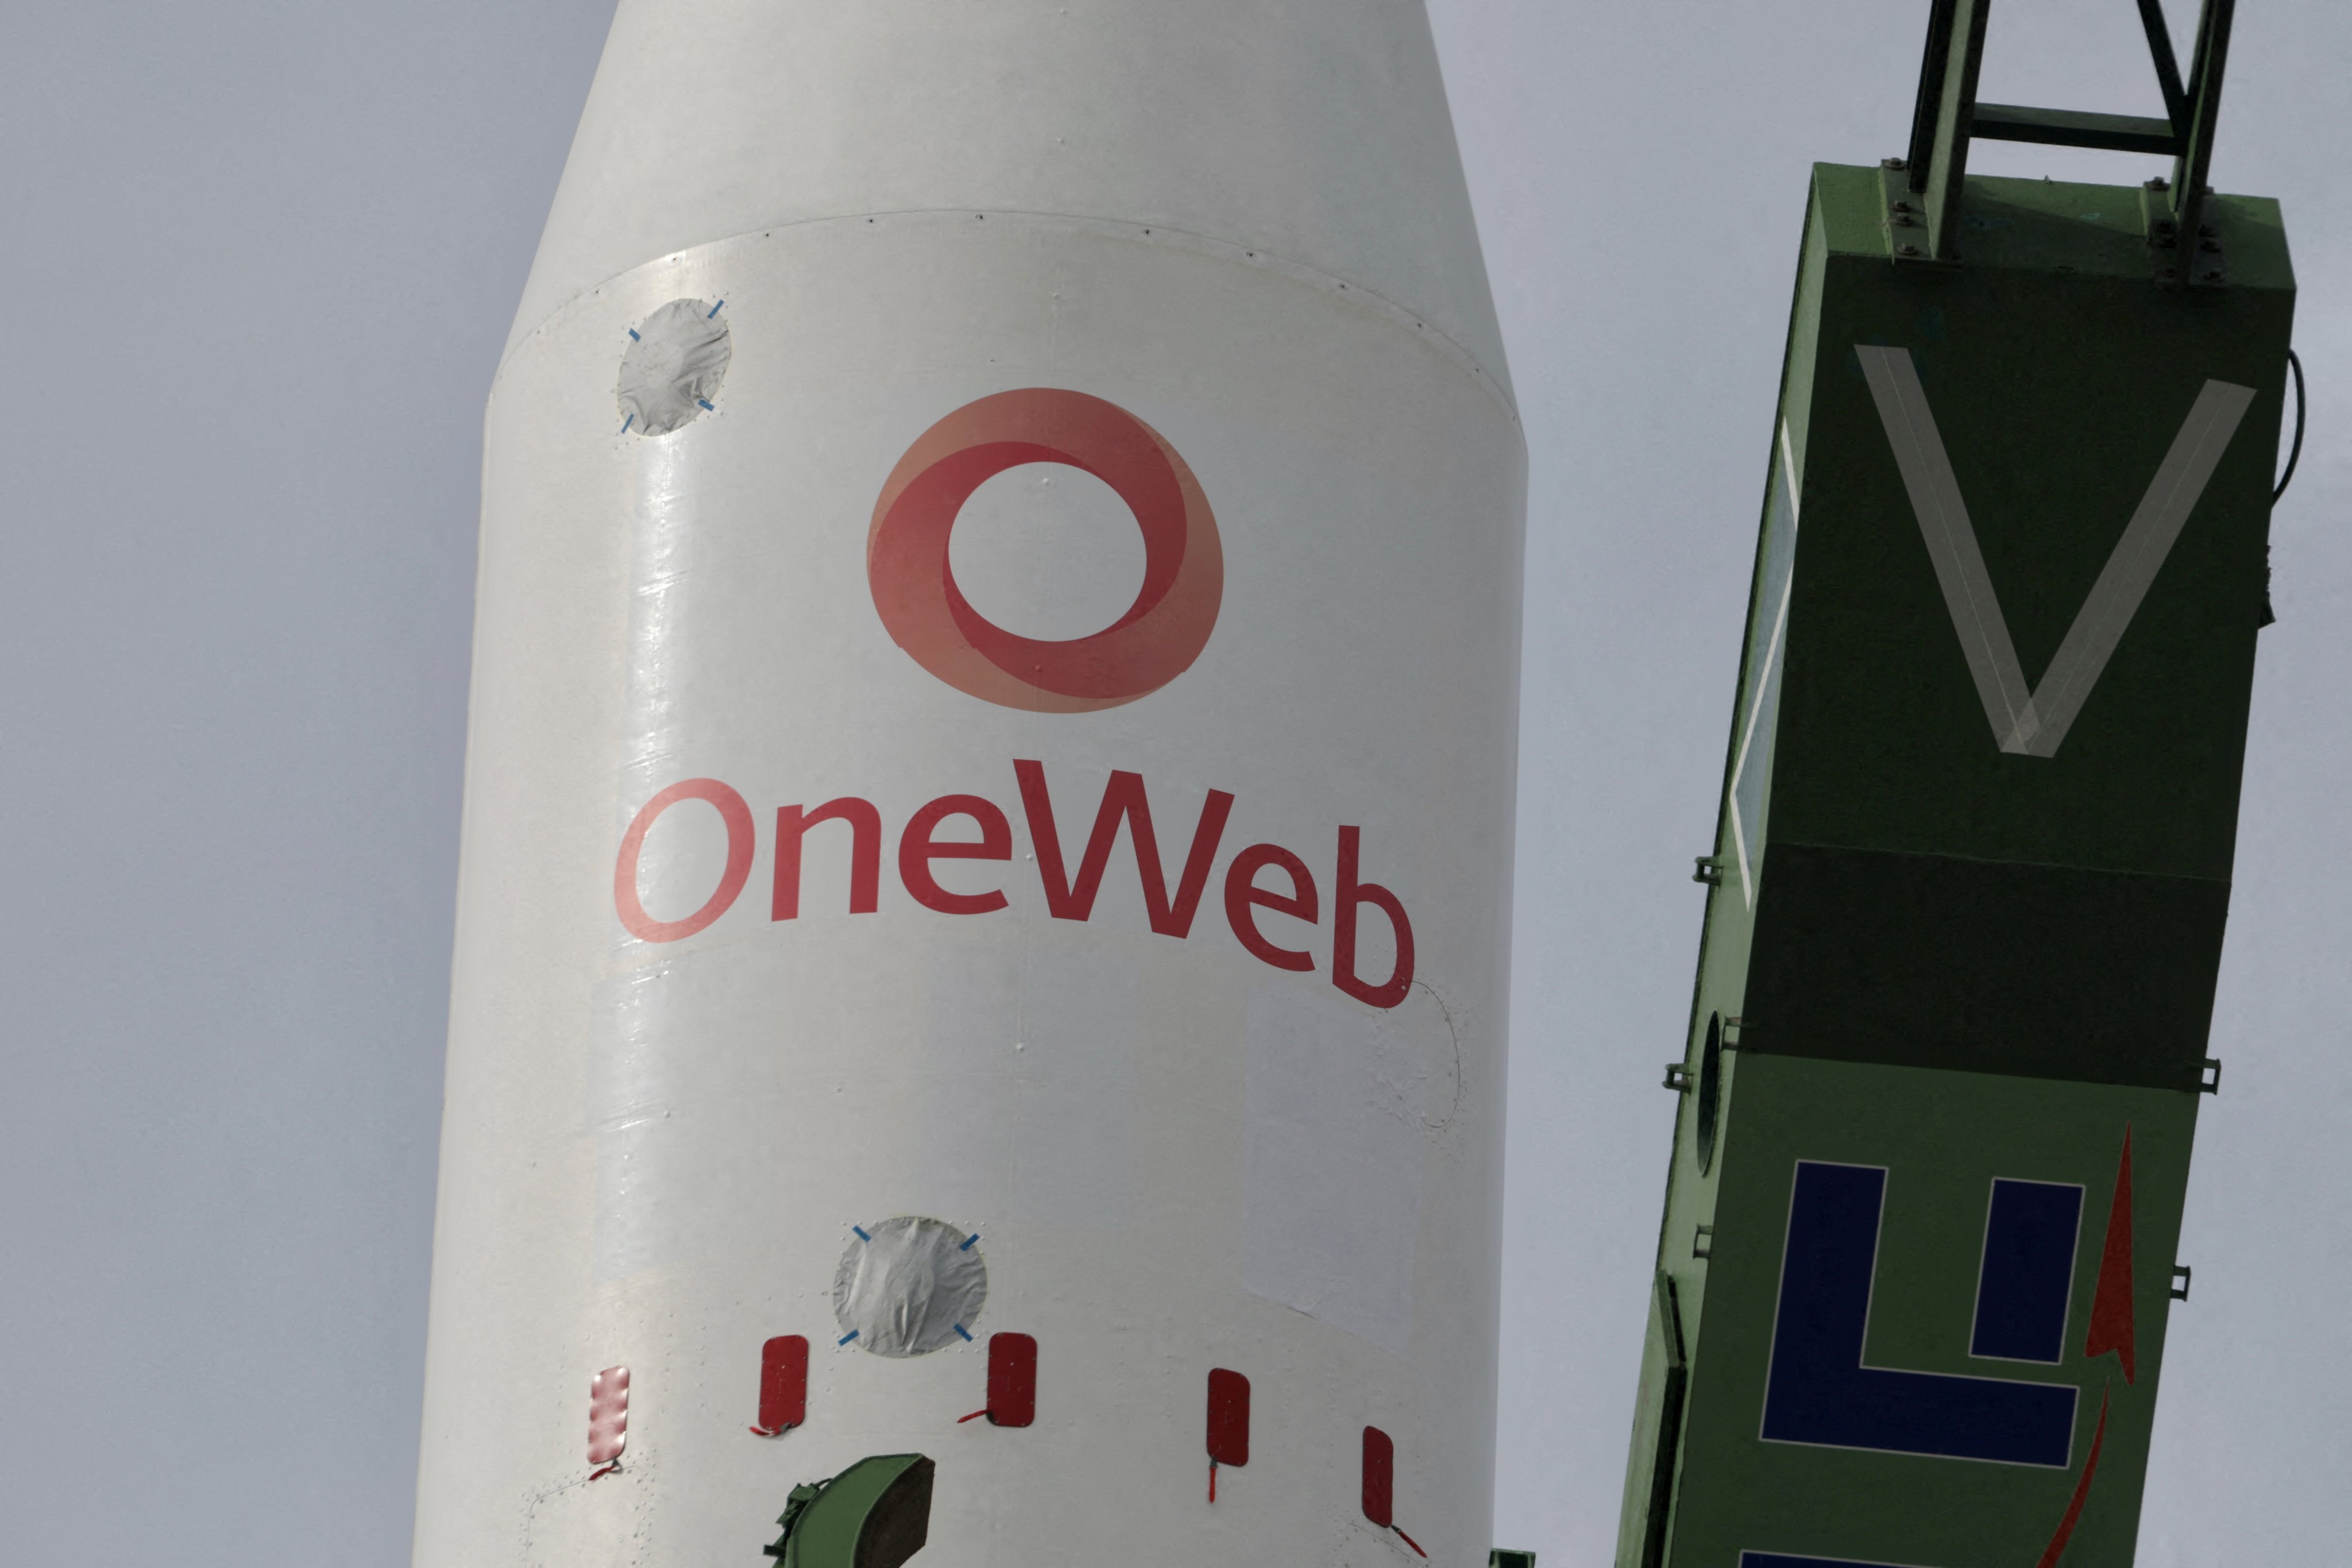 A Soyuz-2.1b rocket booster with a Fregat upper stage and satellites of British firm OneWeb is removed from a launchpad after the launch was cancelled at the Baikonur Cosmodrome, Kazakhstan, on March 4, 2022. Photo: Roscosmos via Reuters